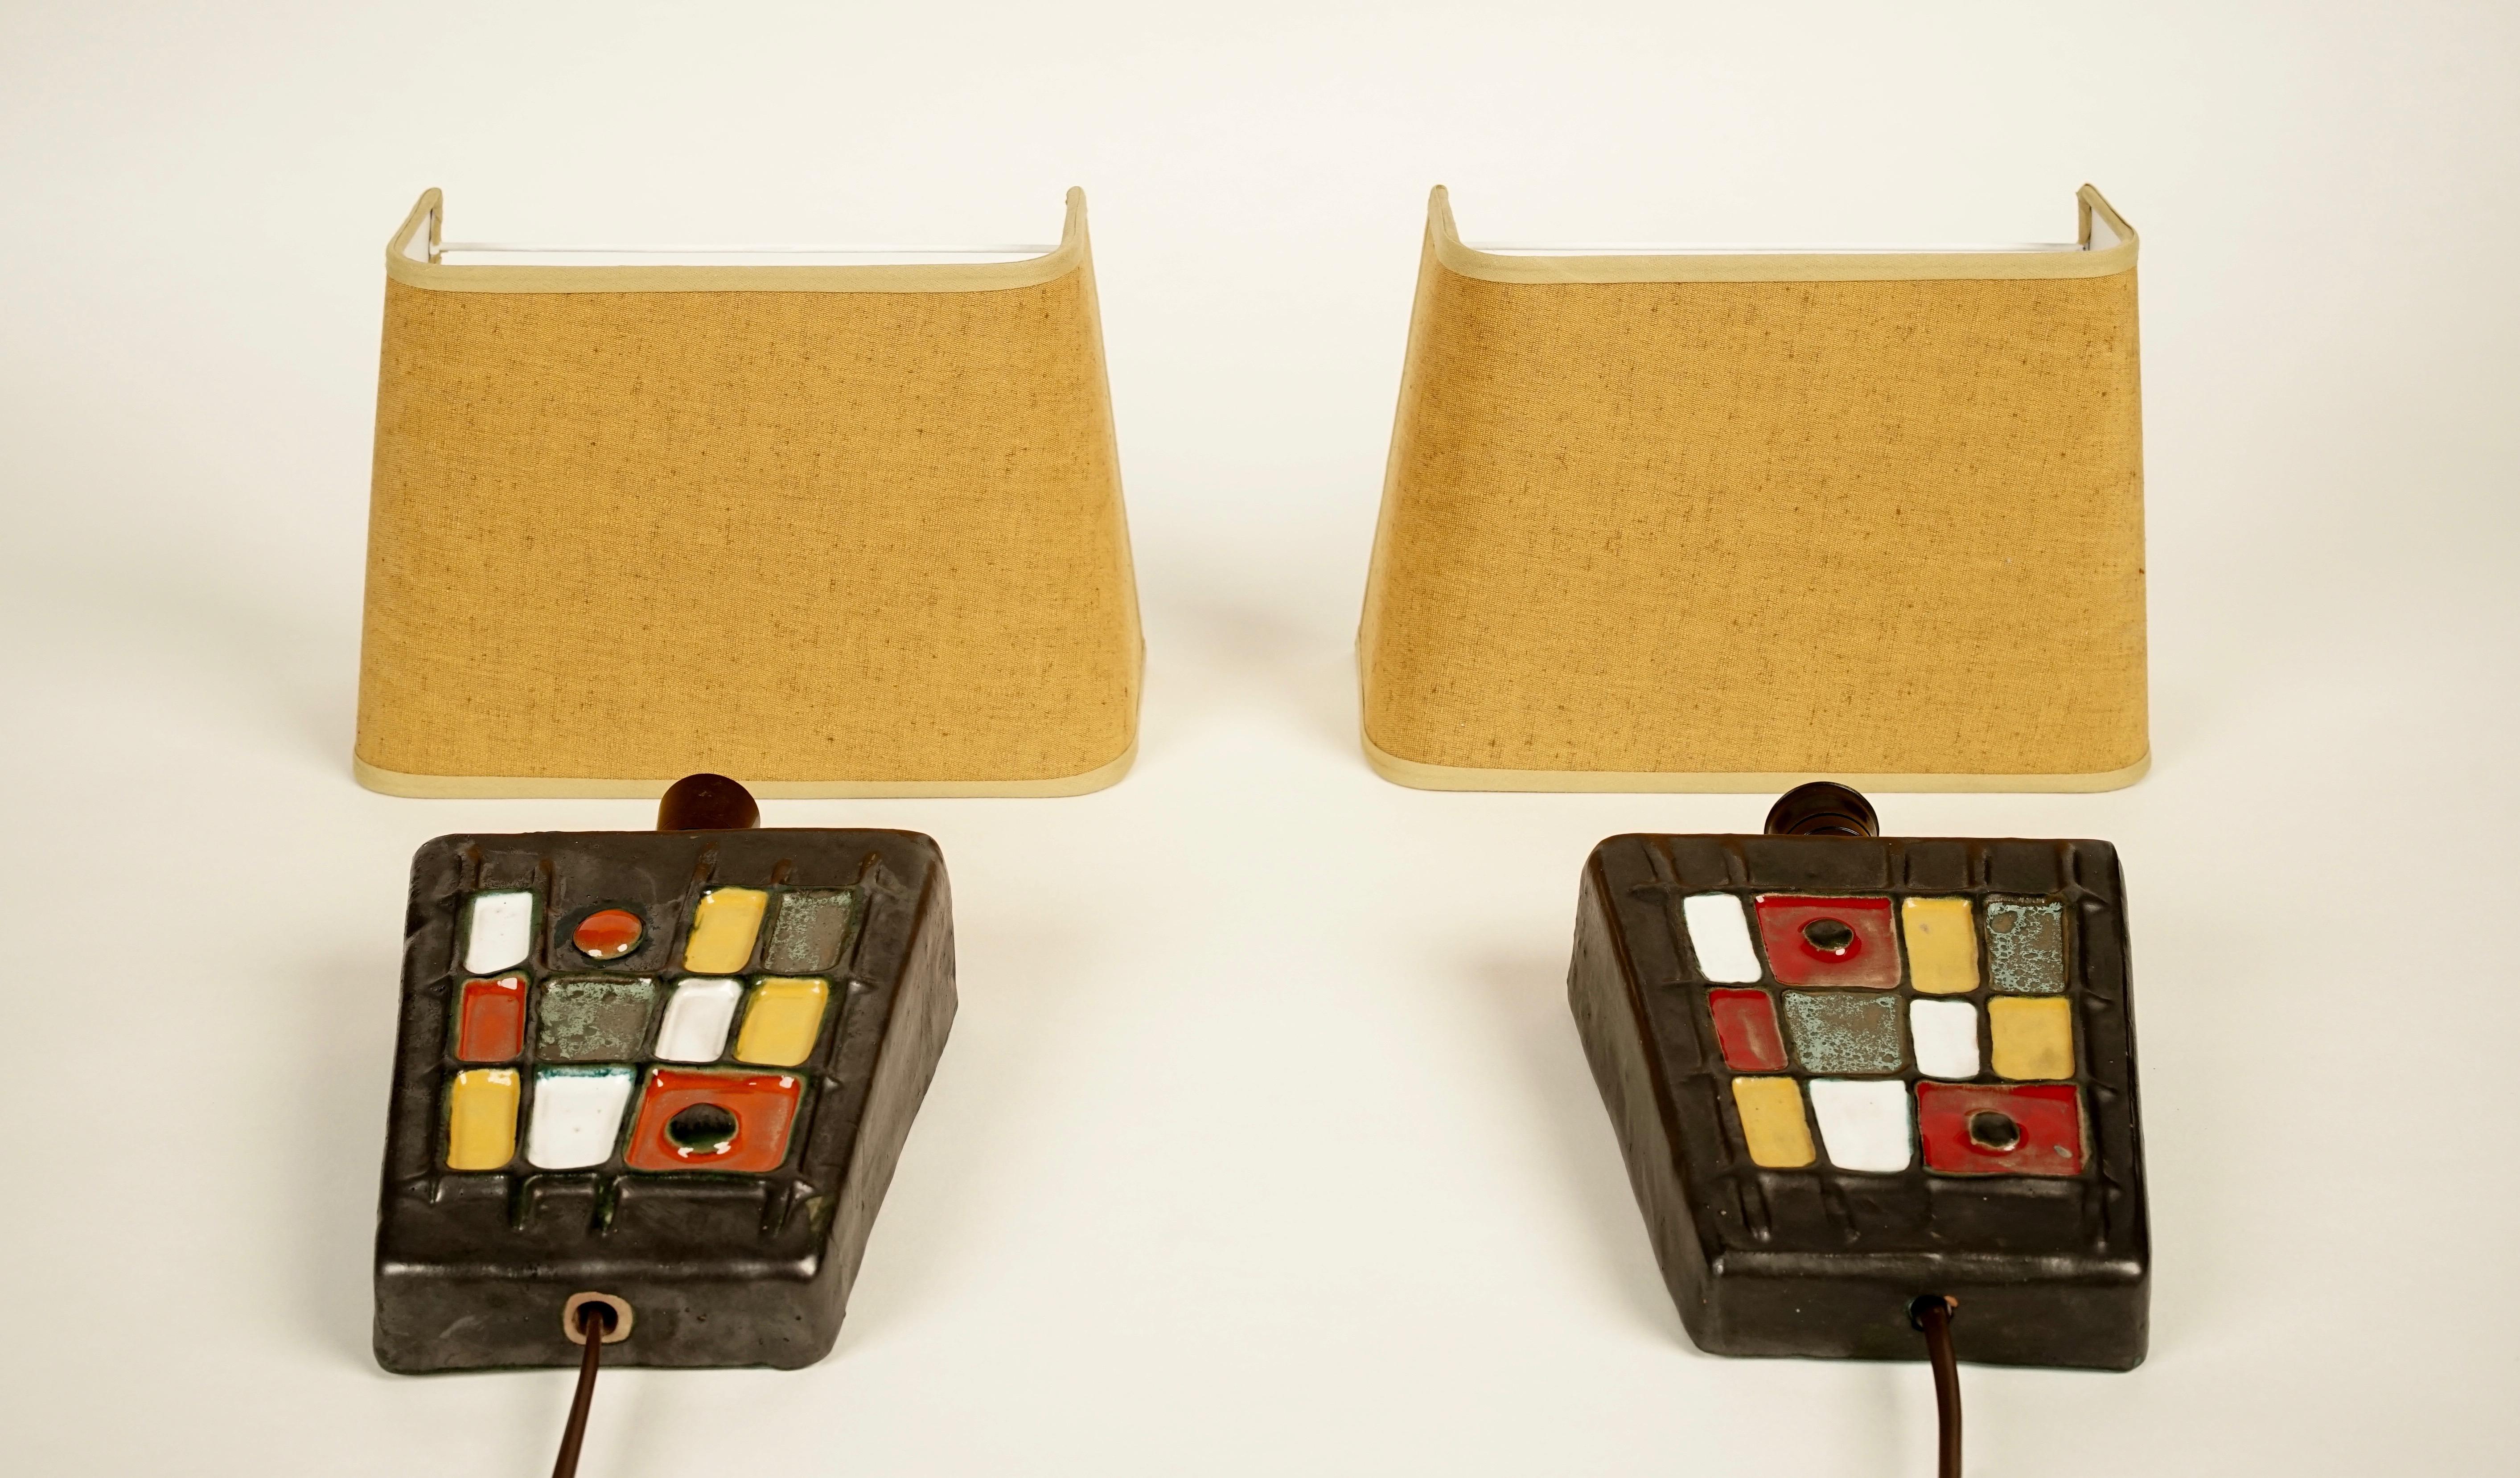 Mid-Century Modern Pair of Modernist Wall Lights, From the Studio Ceramics Movement, 1950s Hungary